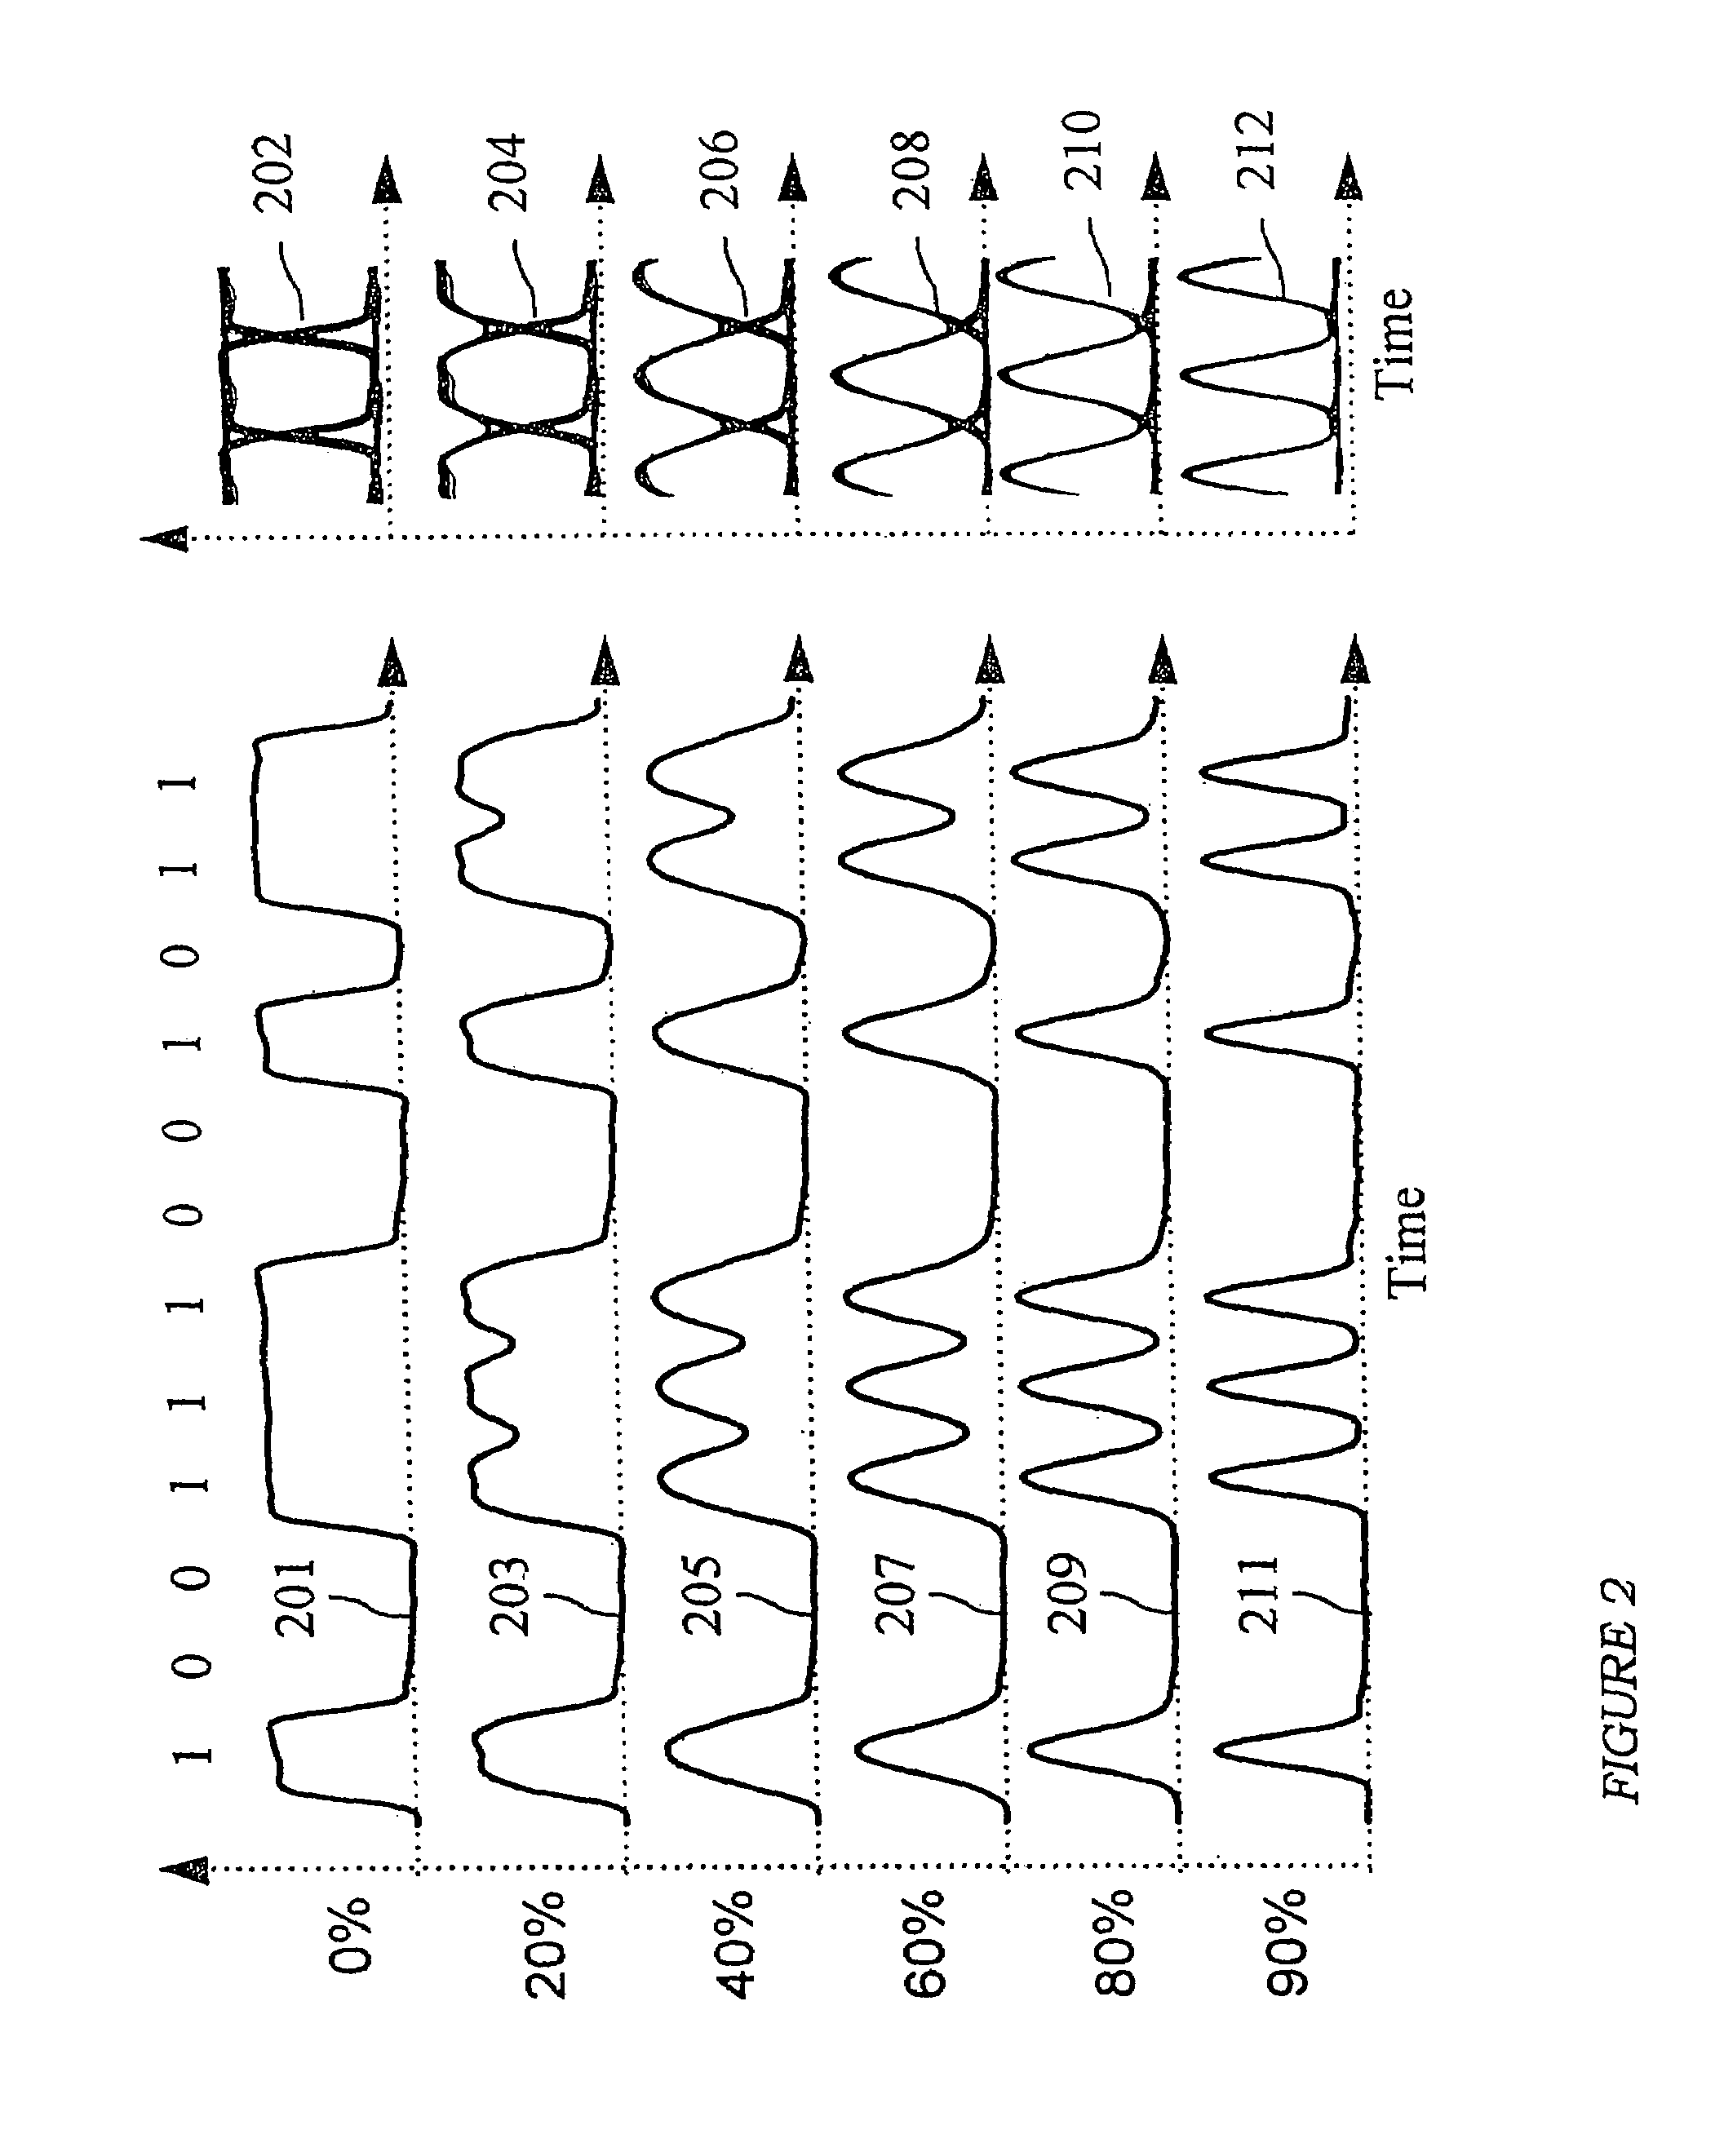 Synchronous amplitude modulation for improved performance of optical transmission systems